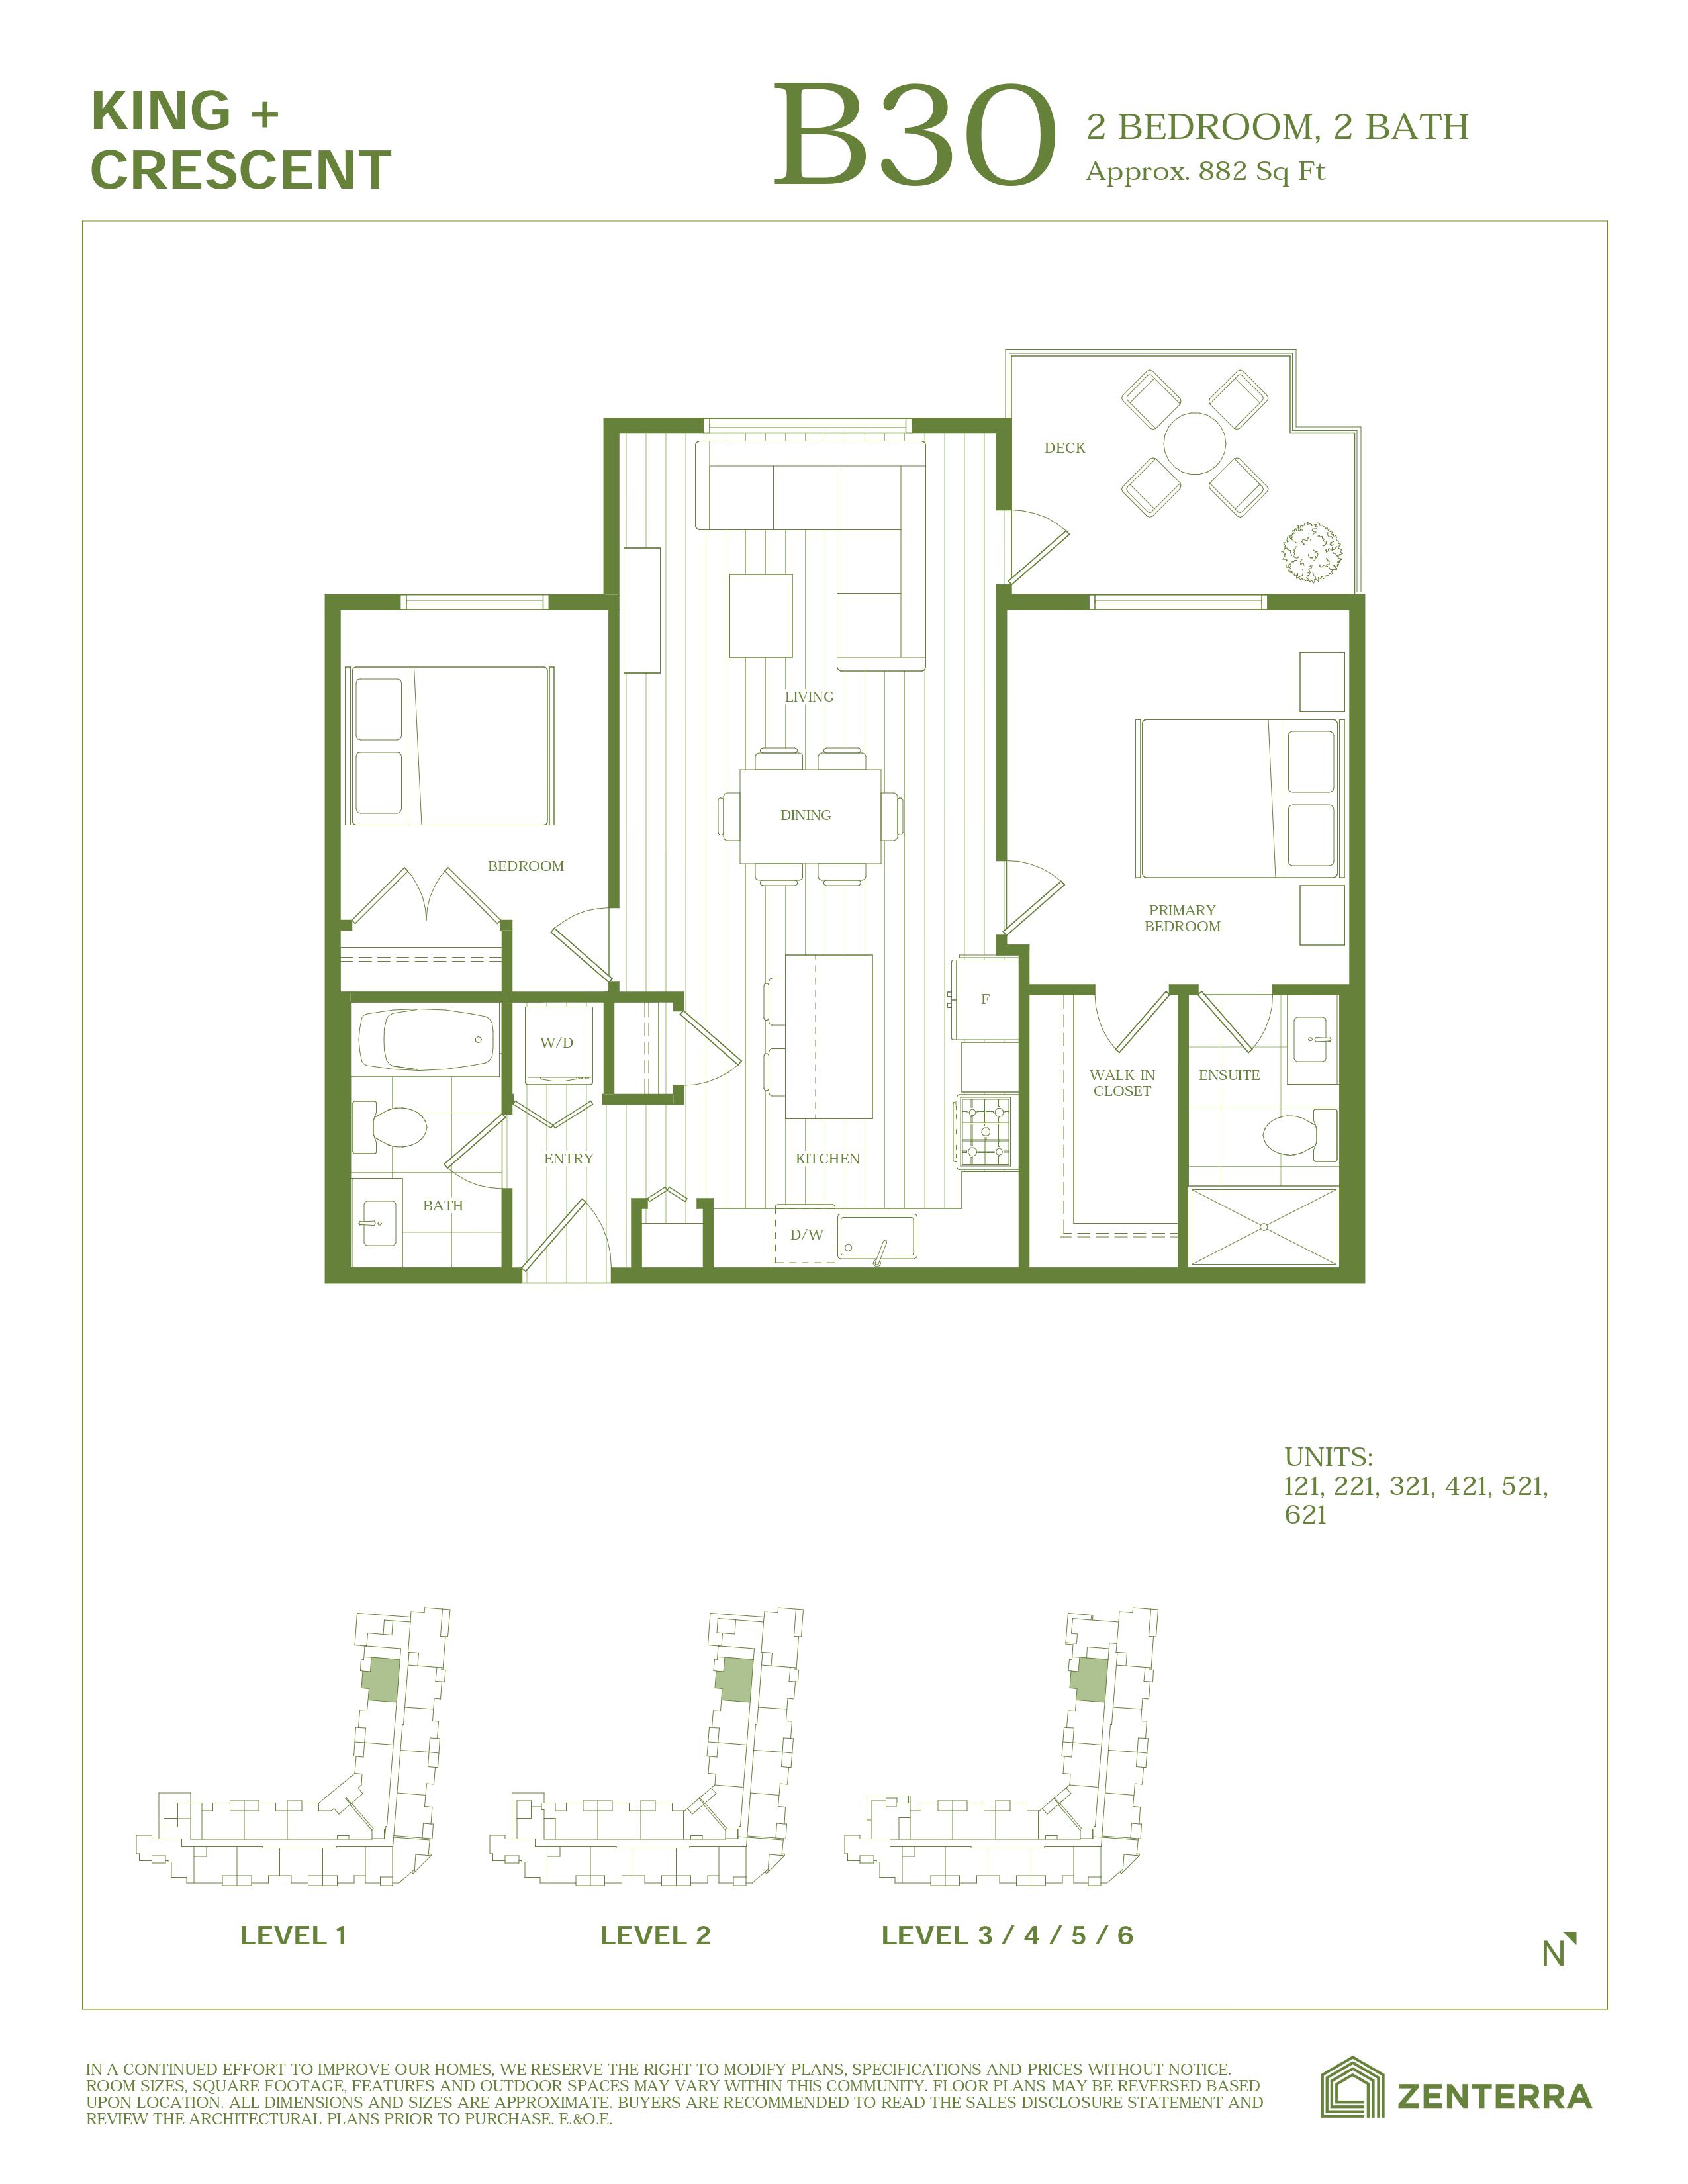 B13 Floor Plan of King + Crescent Condos with undefined beds